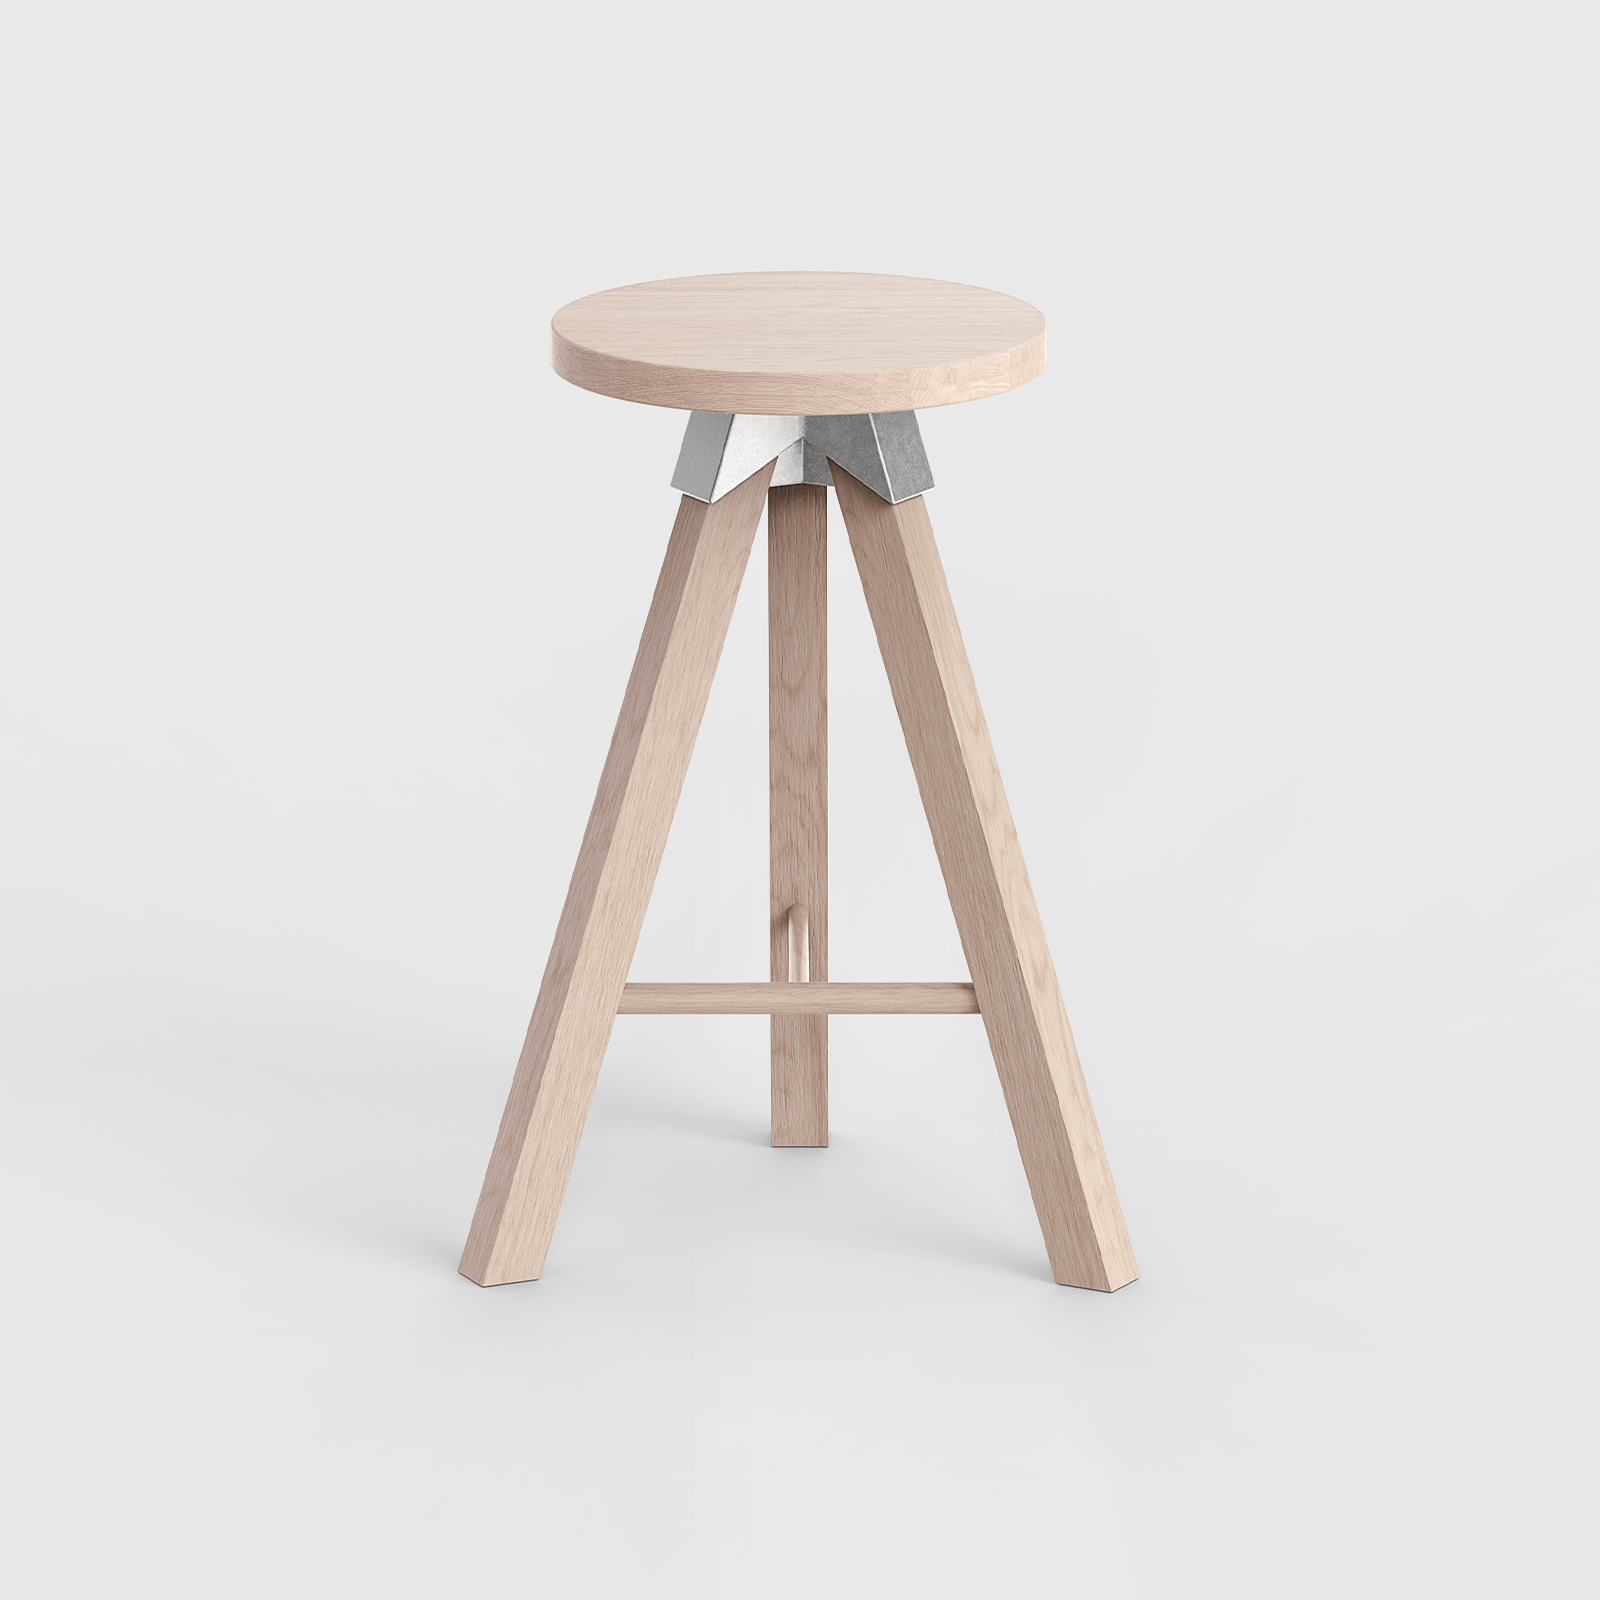 A-joint tall stool in solid Victorian Ash with cast aluminium A-joint